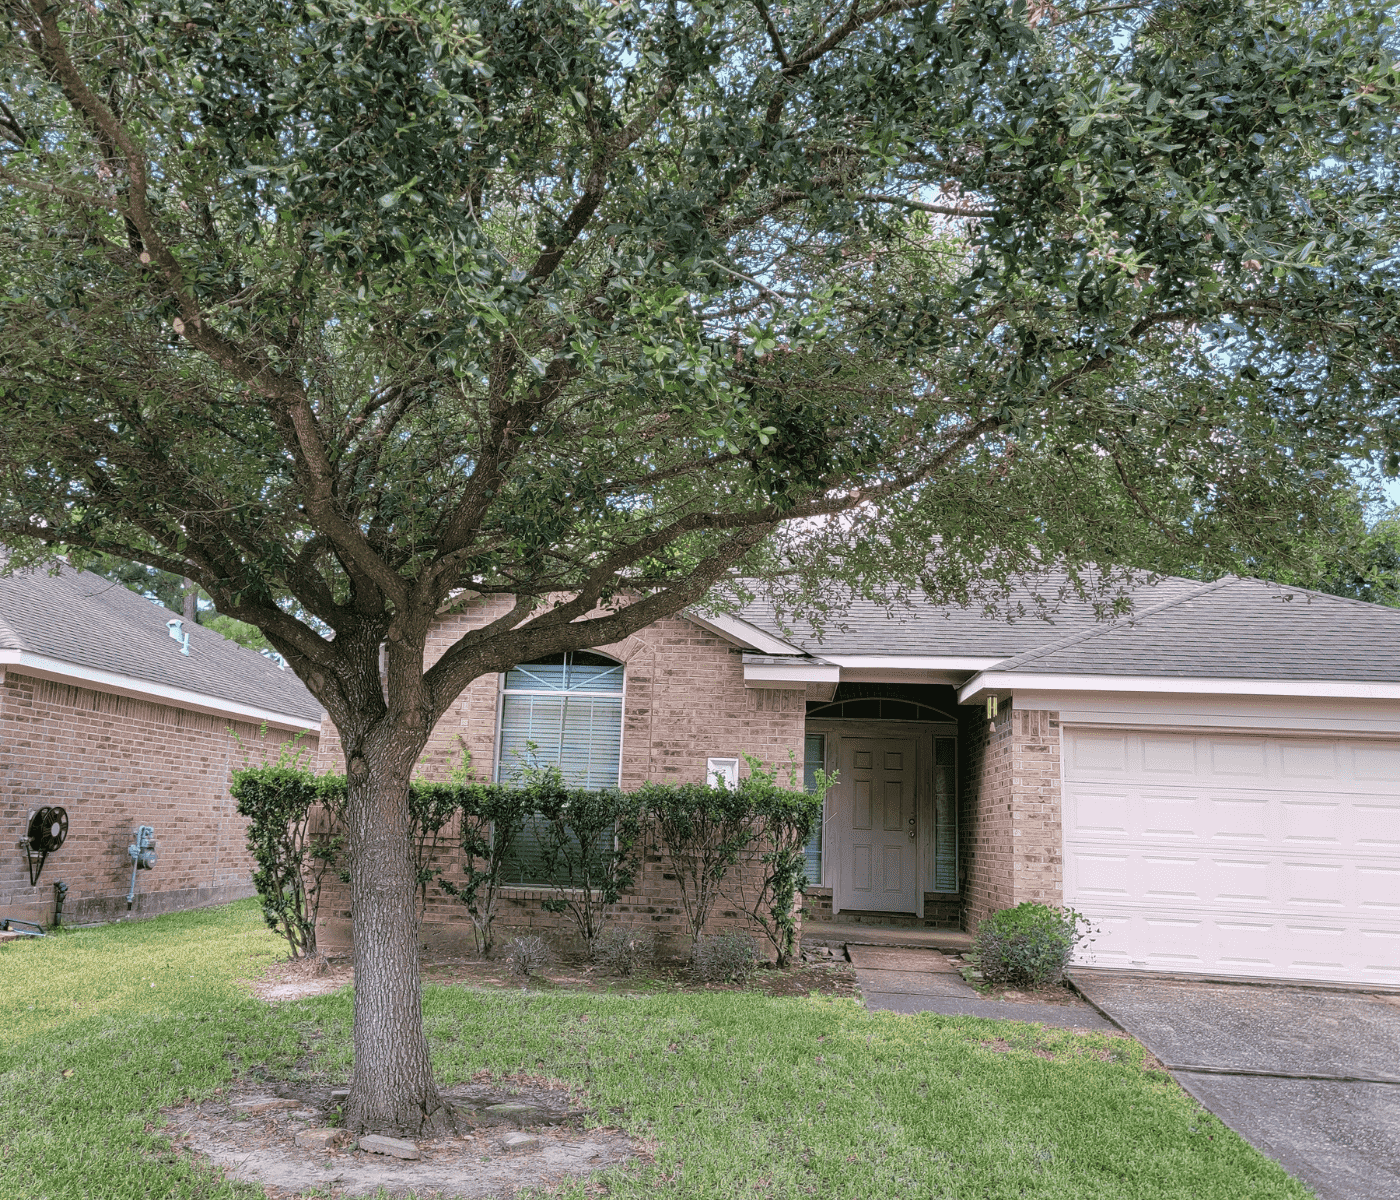 Well maintained tree after our Spring tree service by Texas Tree Care